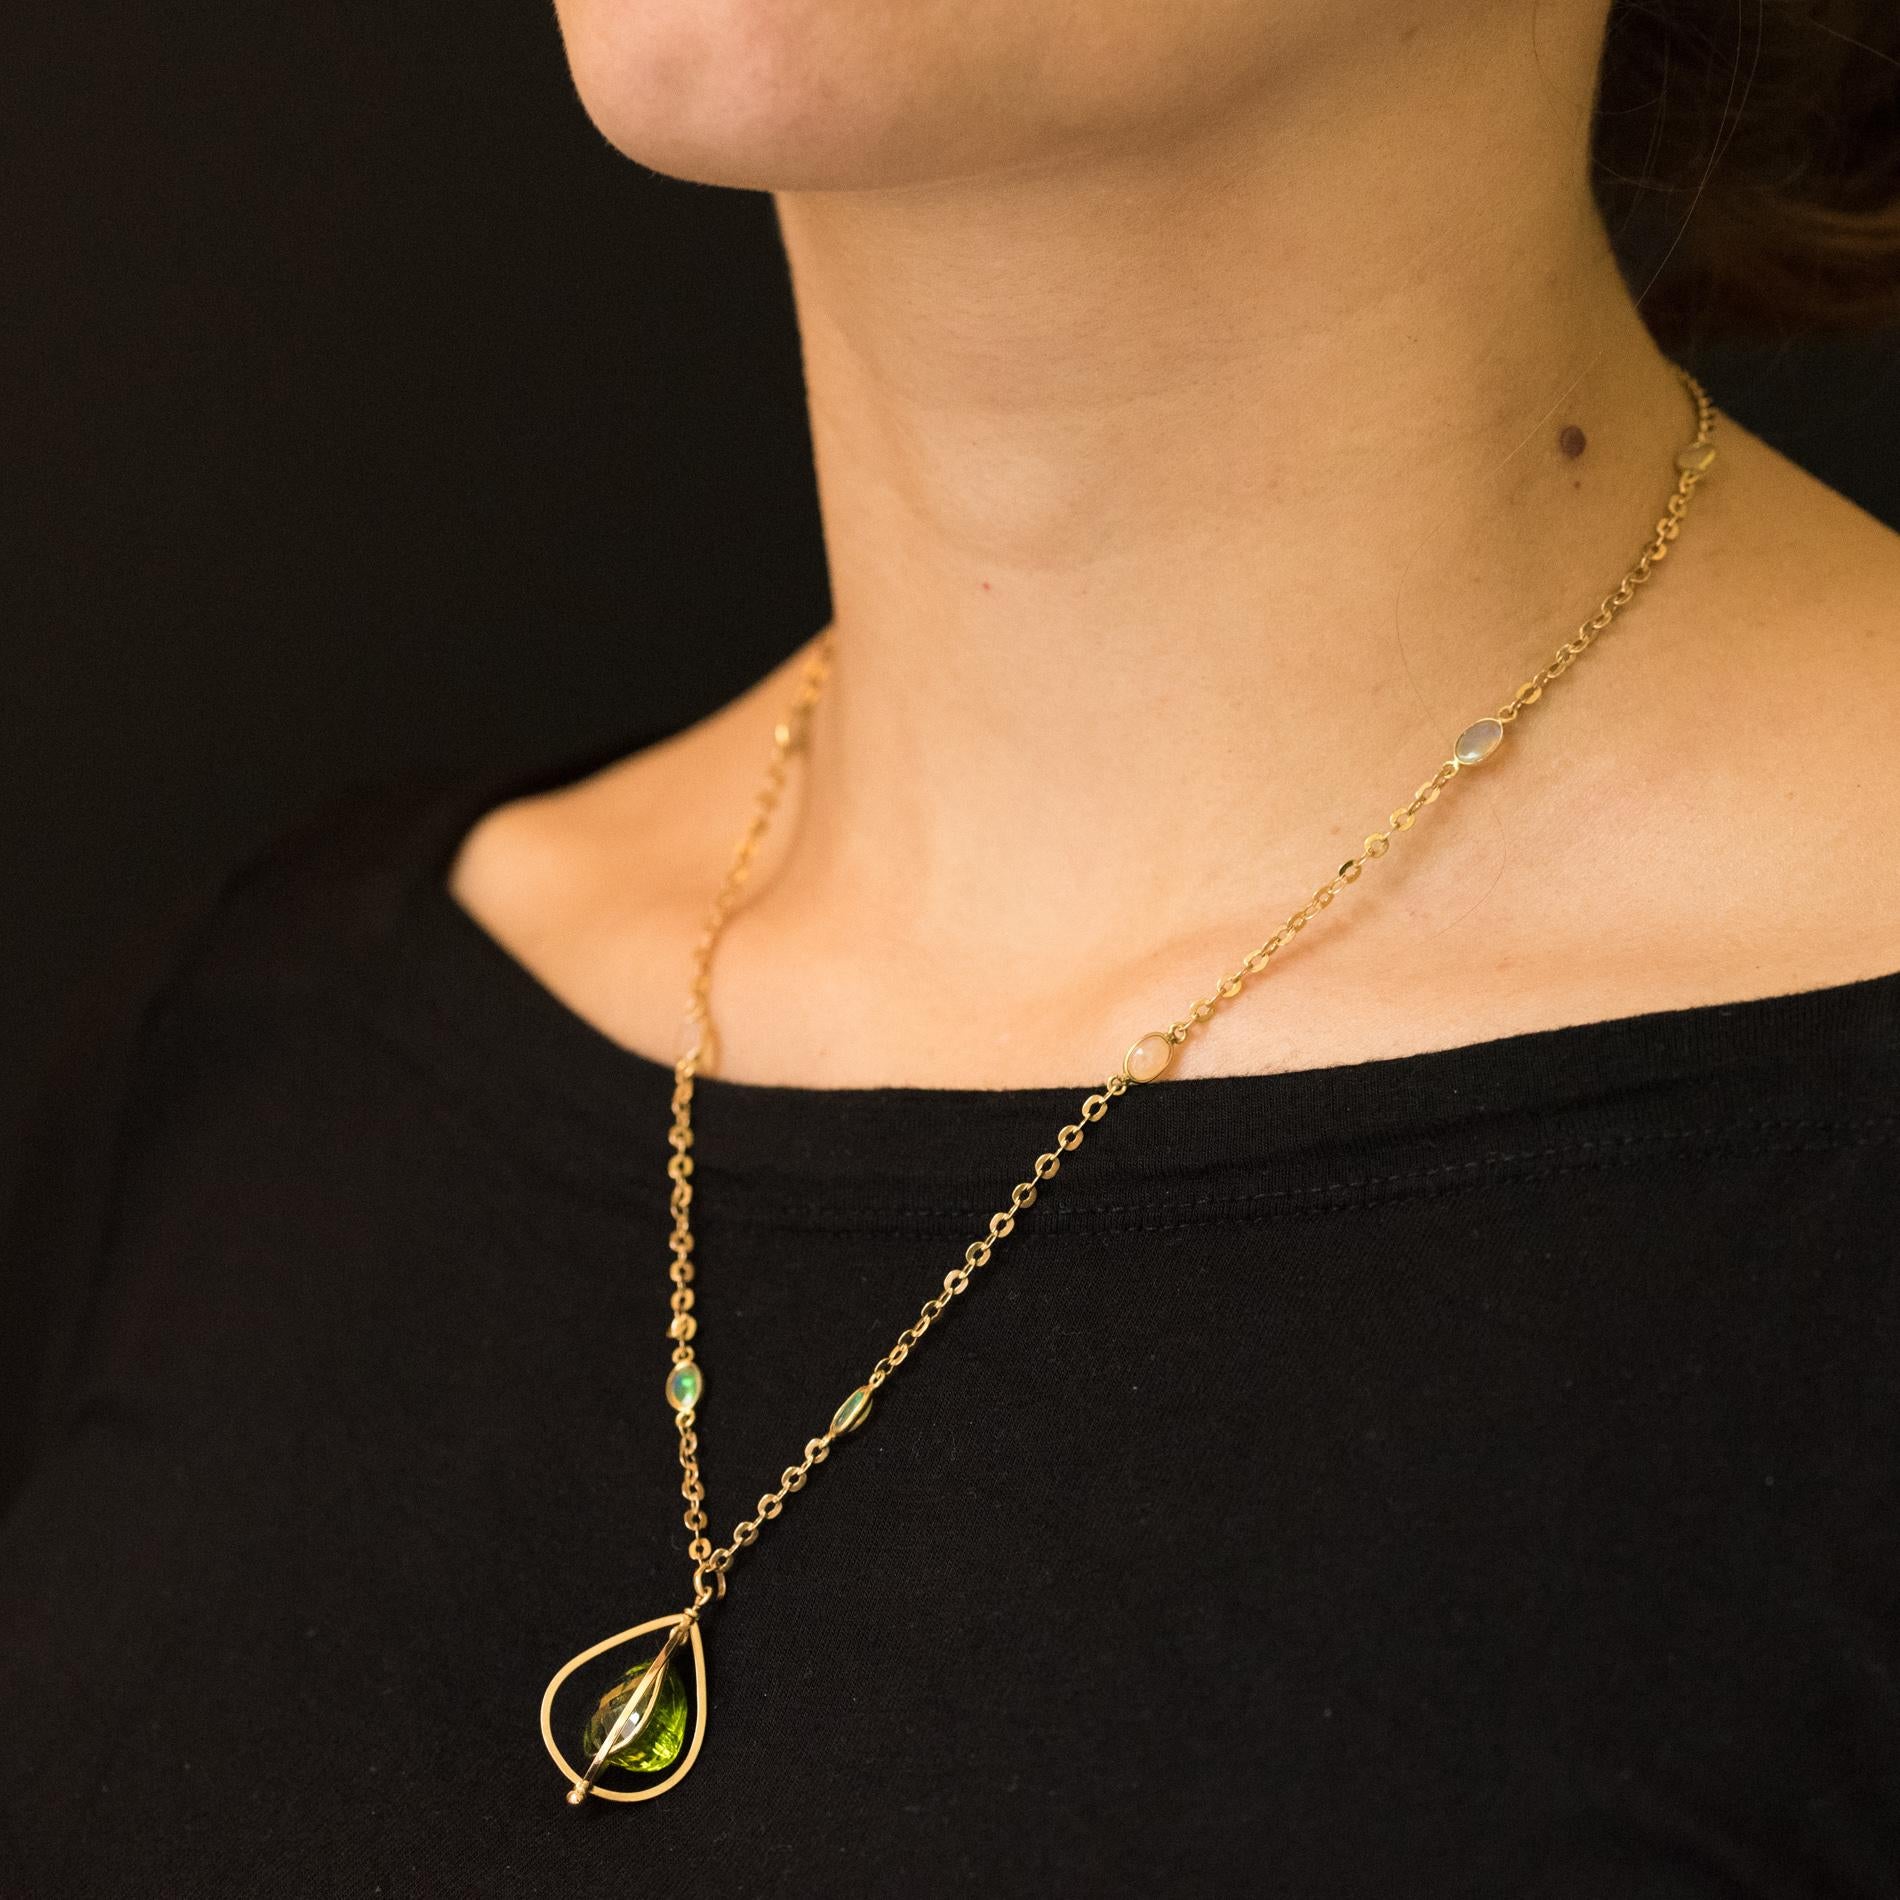 New 12, 1 Carats Peridot Pendant Chain Set with Opals Necklace 1